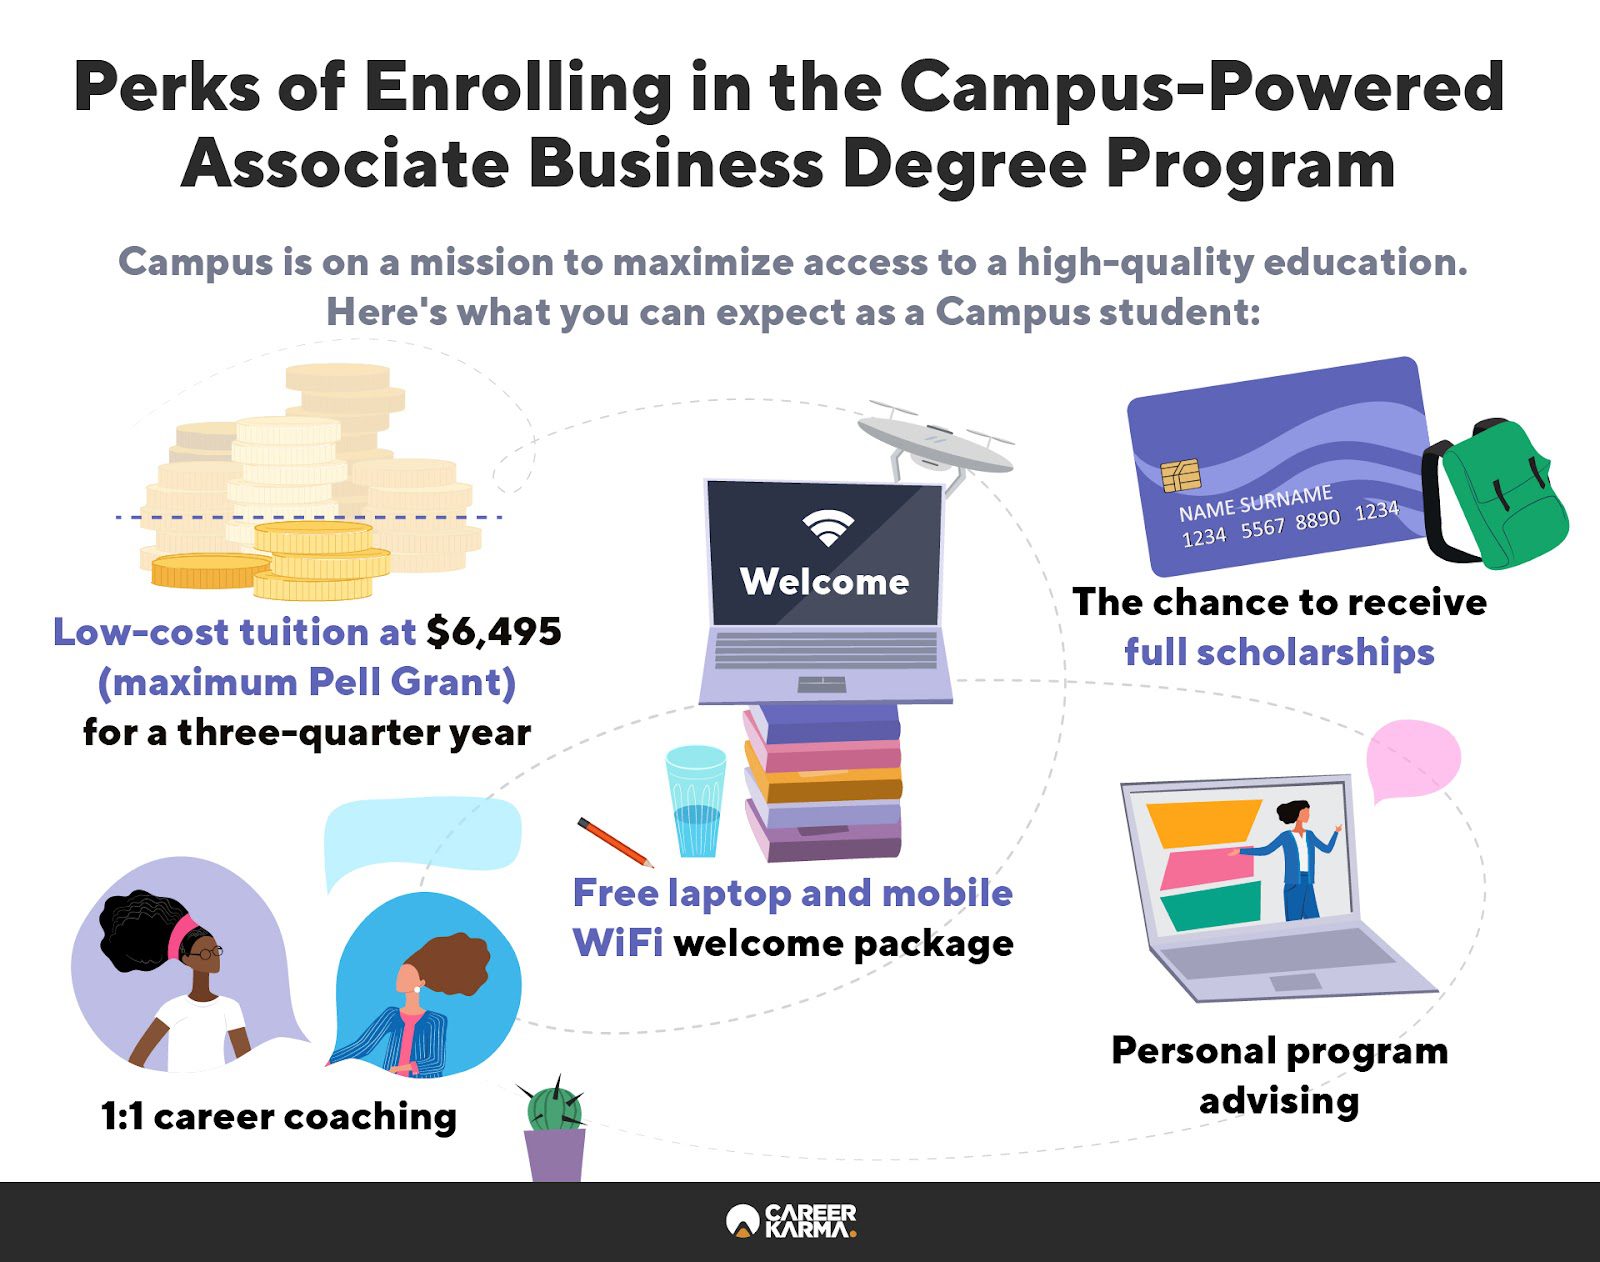 An infographic covering the perks of attending the Campus-powered online associate business degree program